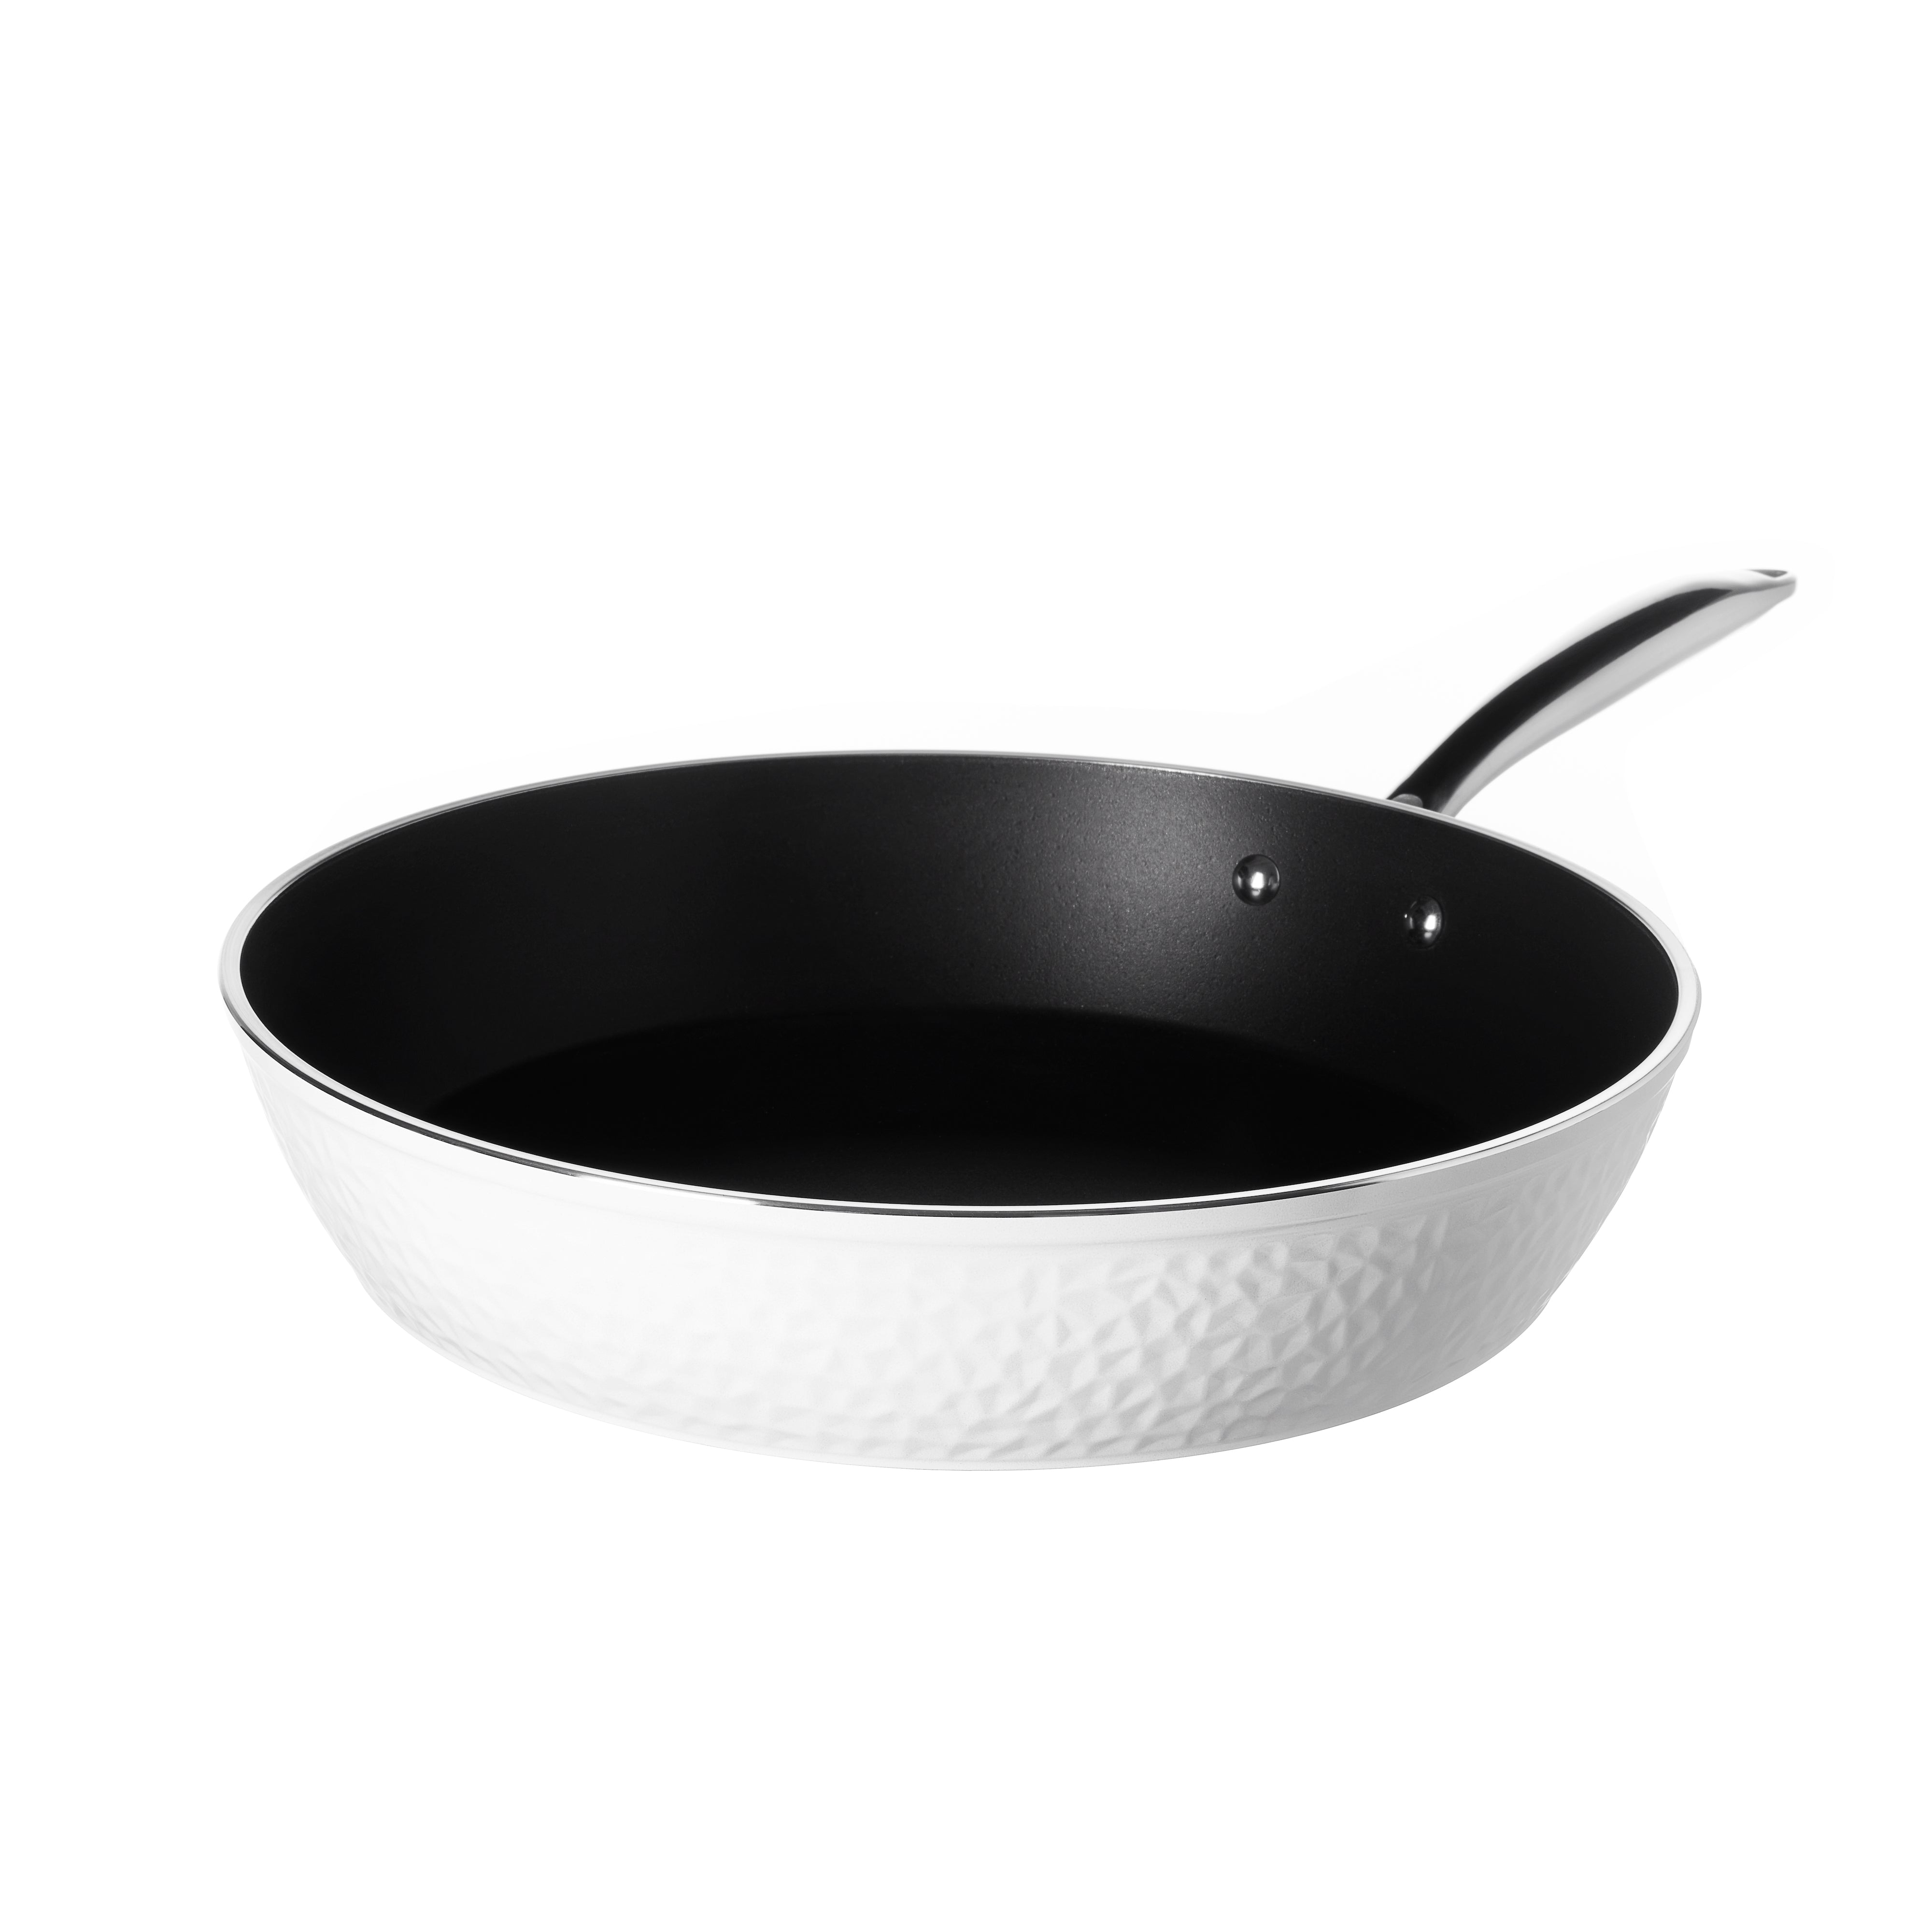 Orgreenic 9.5 inch Hammered Rose Pan with Lid - On Sale - Bed Bath & Beyond  - 32876757